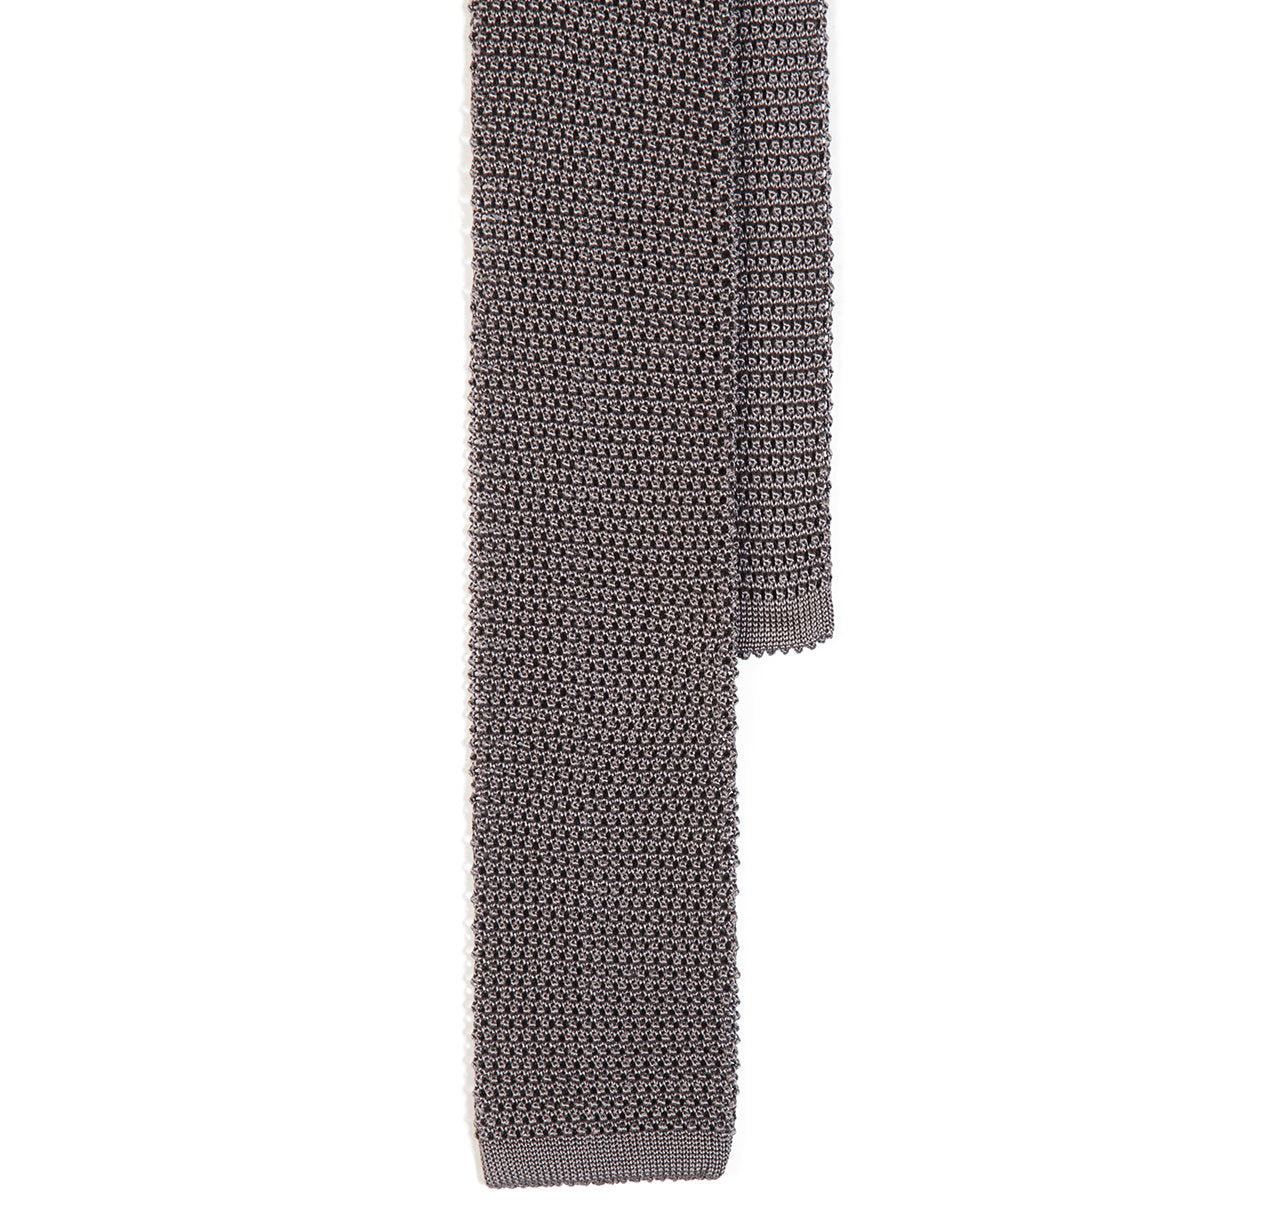 Sir Jack's Classic Knit Silk Tie in Silver